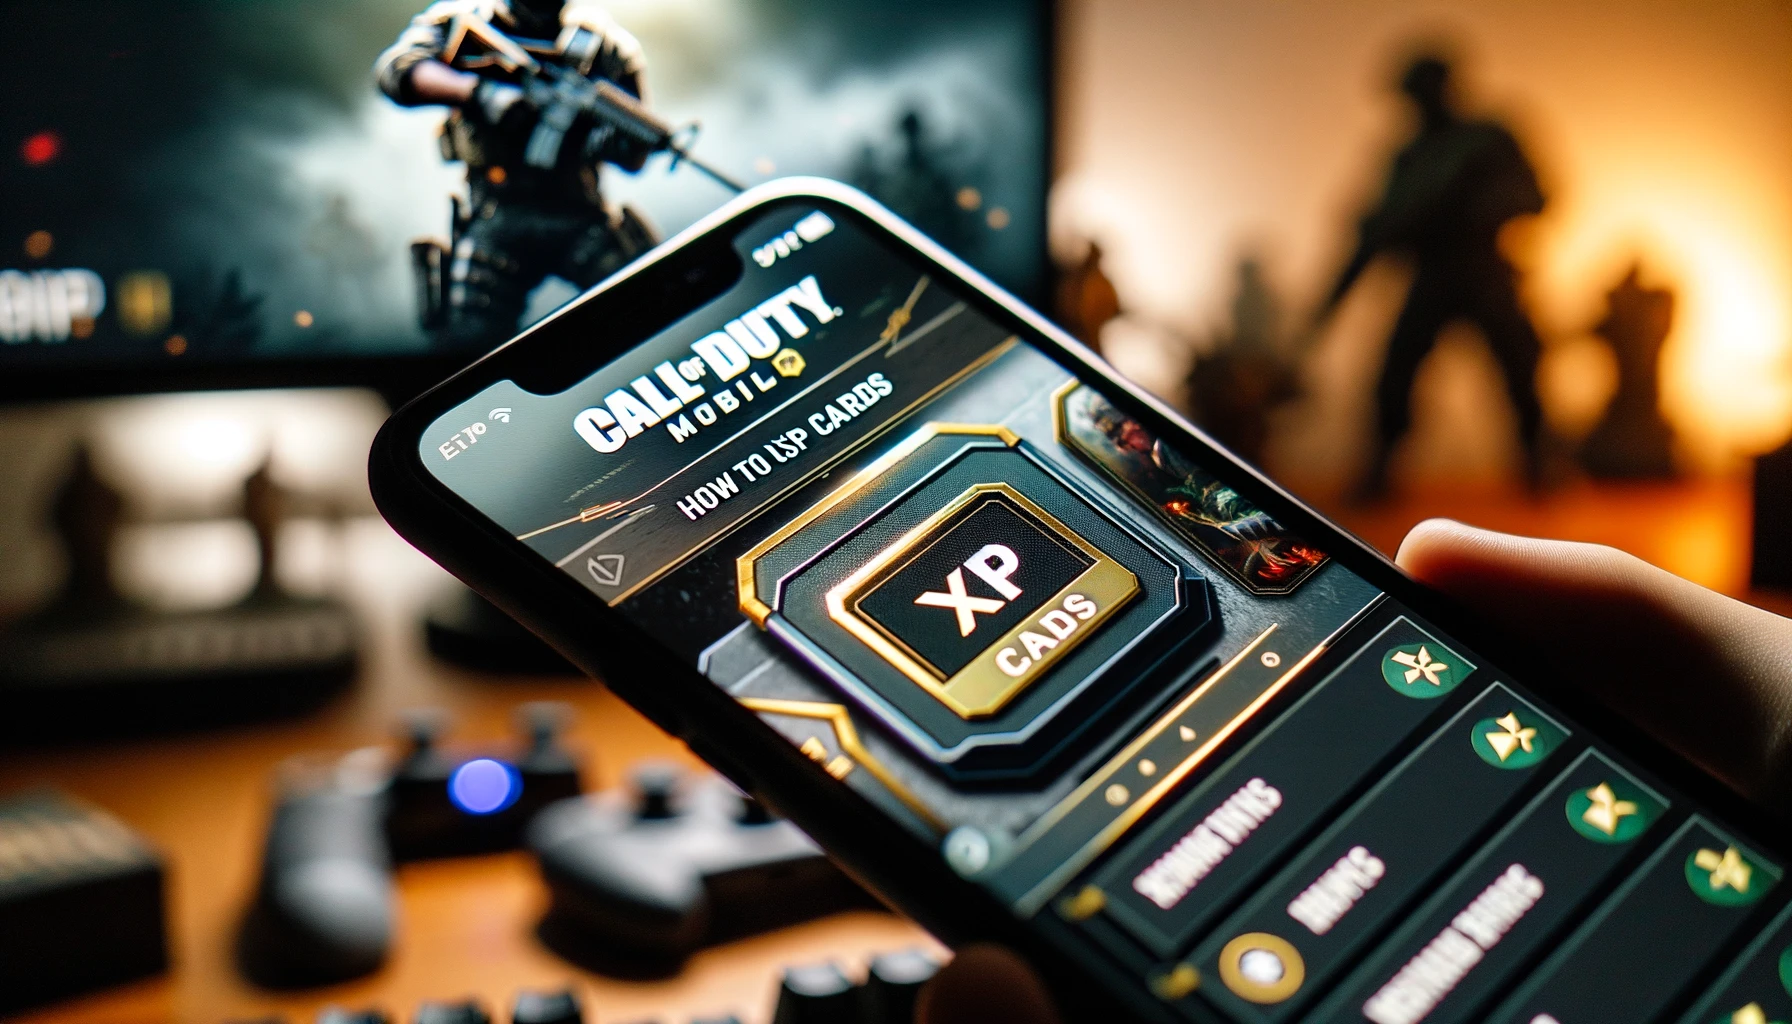 How to Use Xp Cards in Cod Mobile